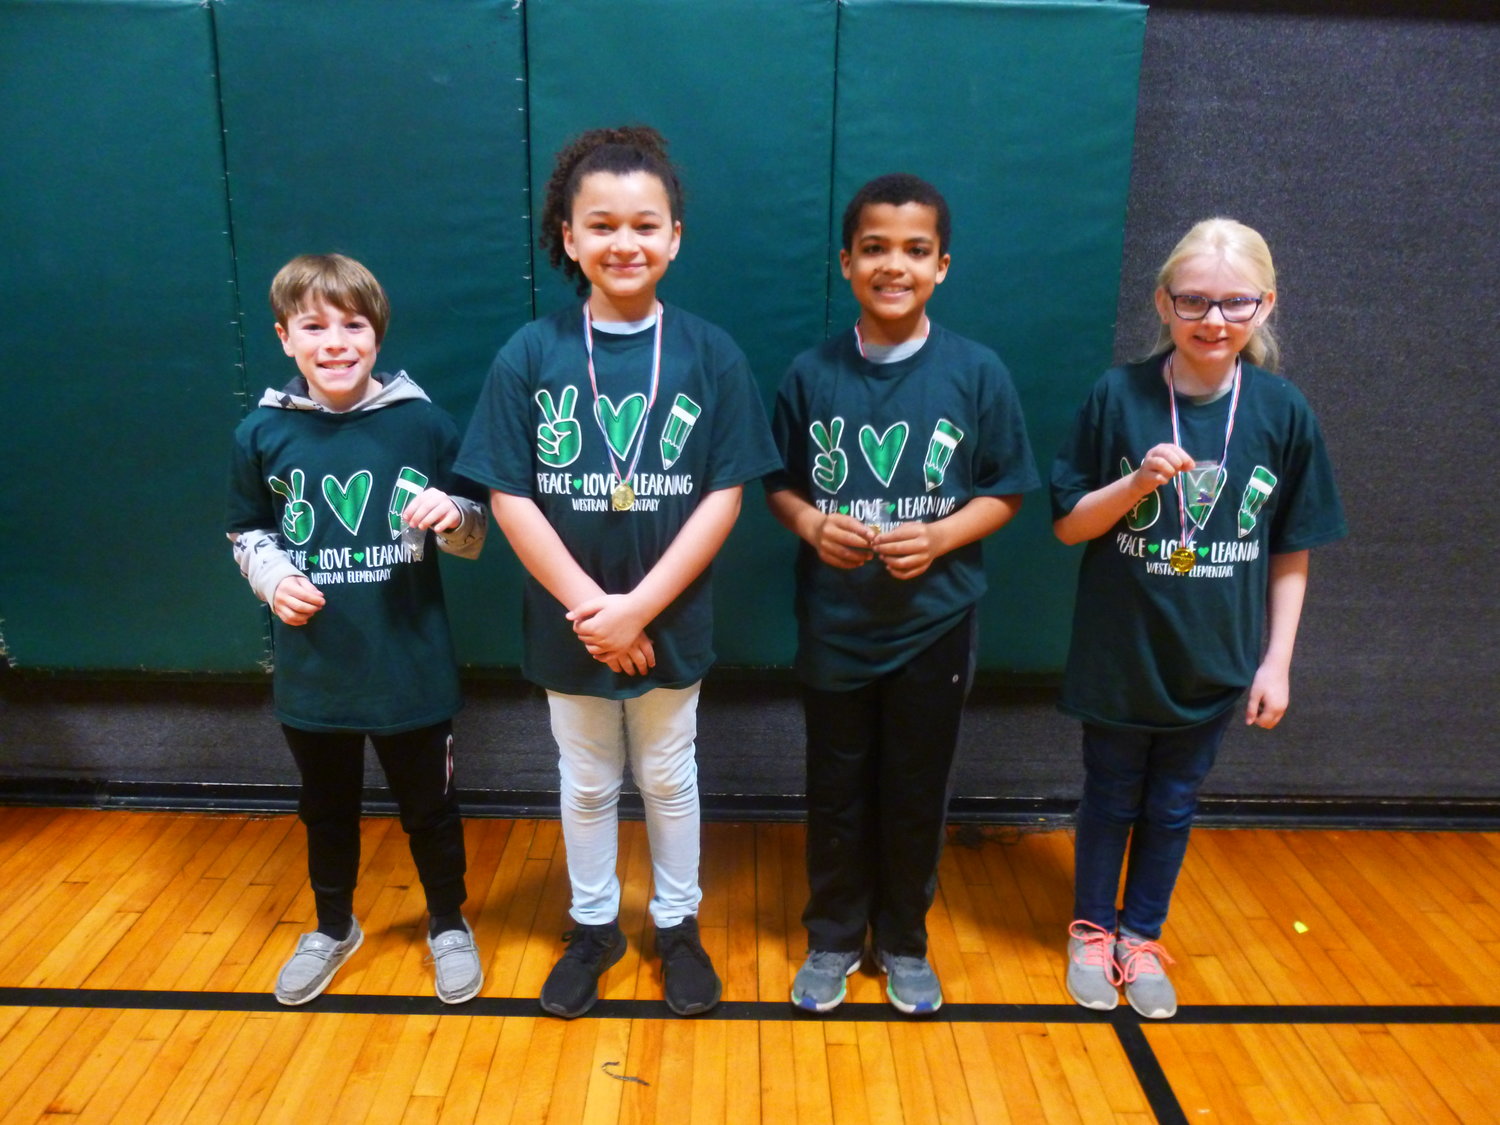 Pictured are Westran fourth graders who made the A honor roll for the third quarter. From left are Lennon Winterbower, Preah Matthews, Mason Veal and Abigail McAdams.